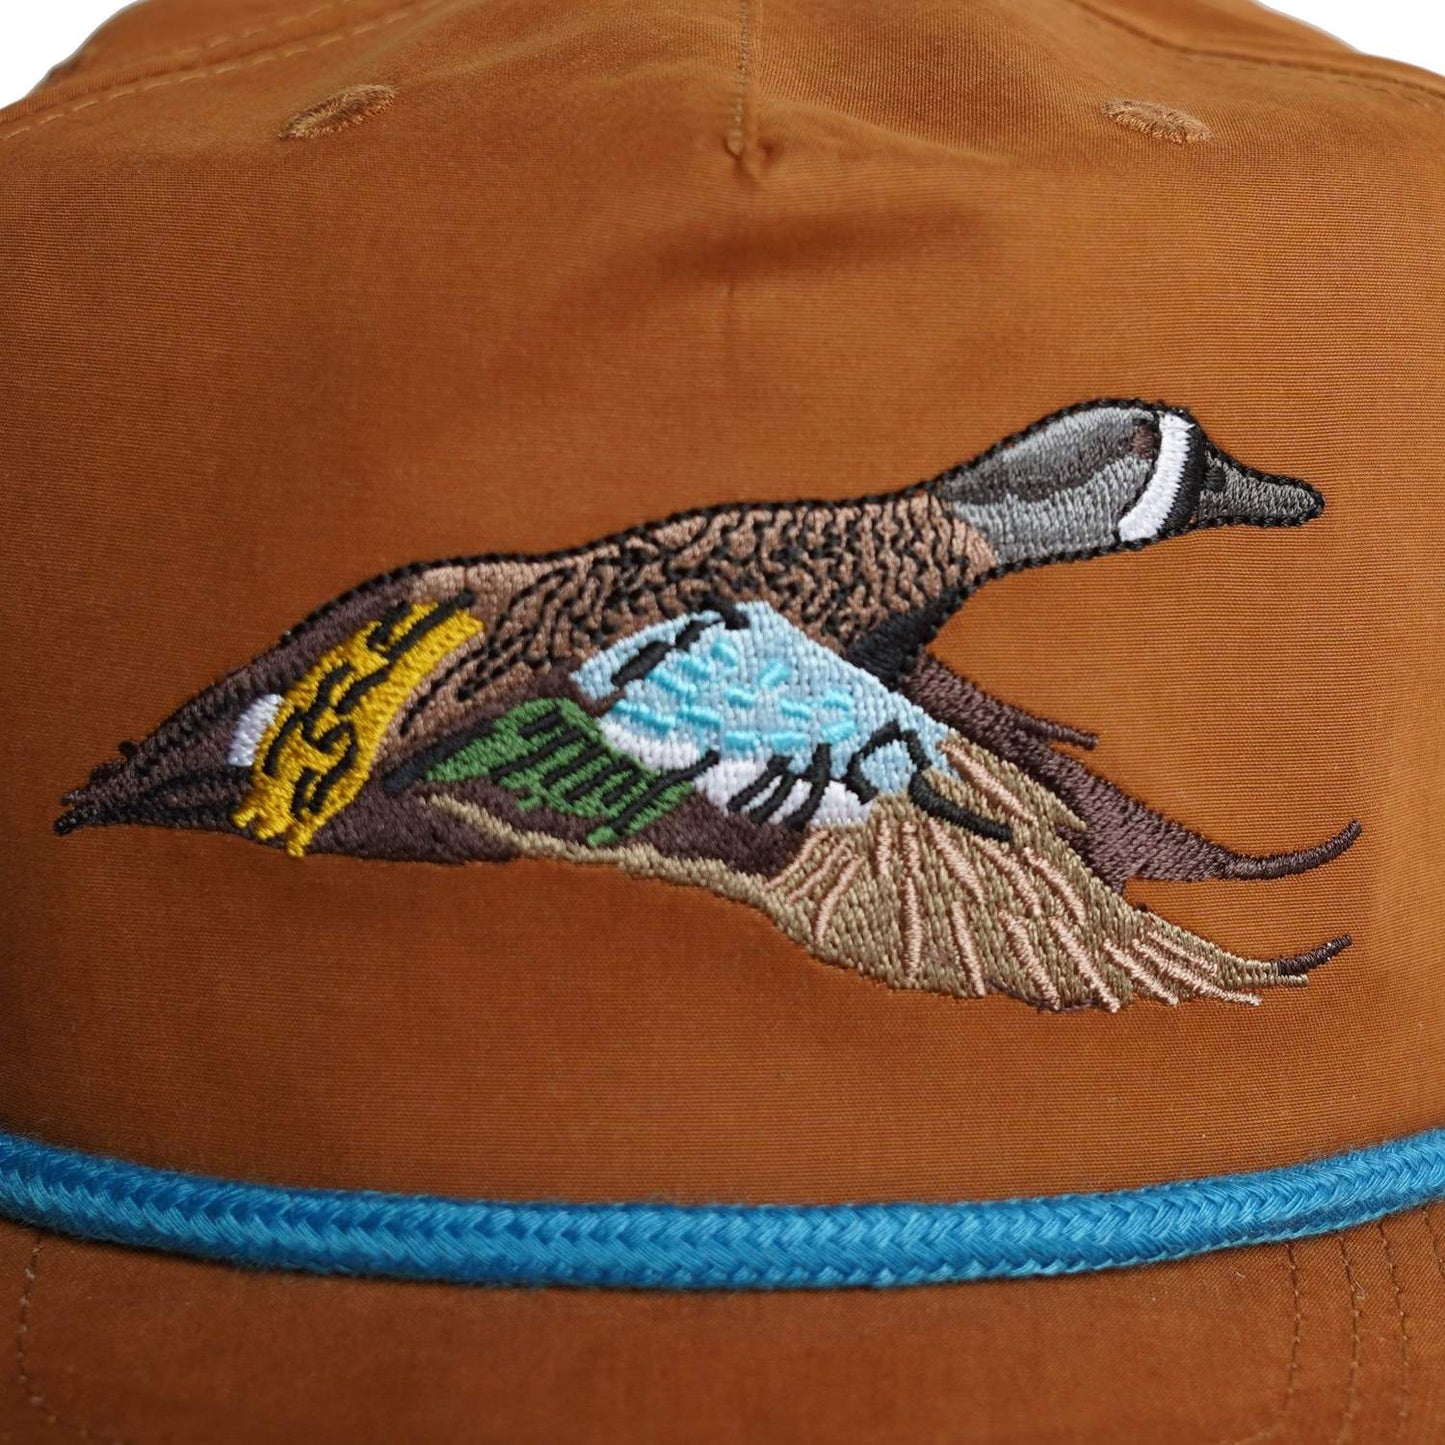 Duck Camp Blue Wing Teal Hat